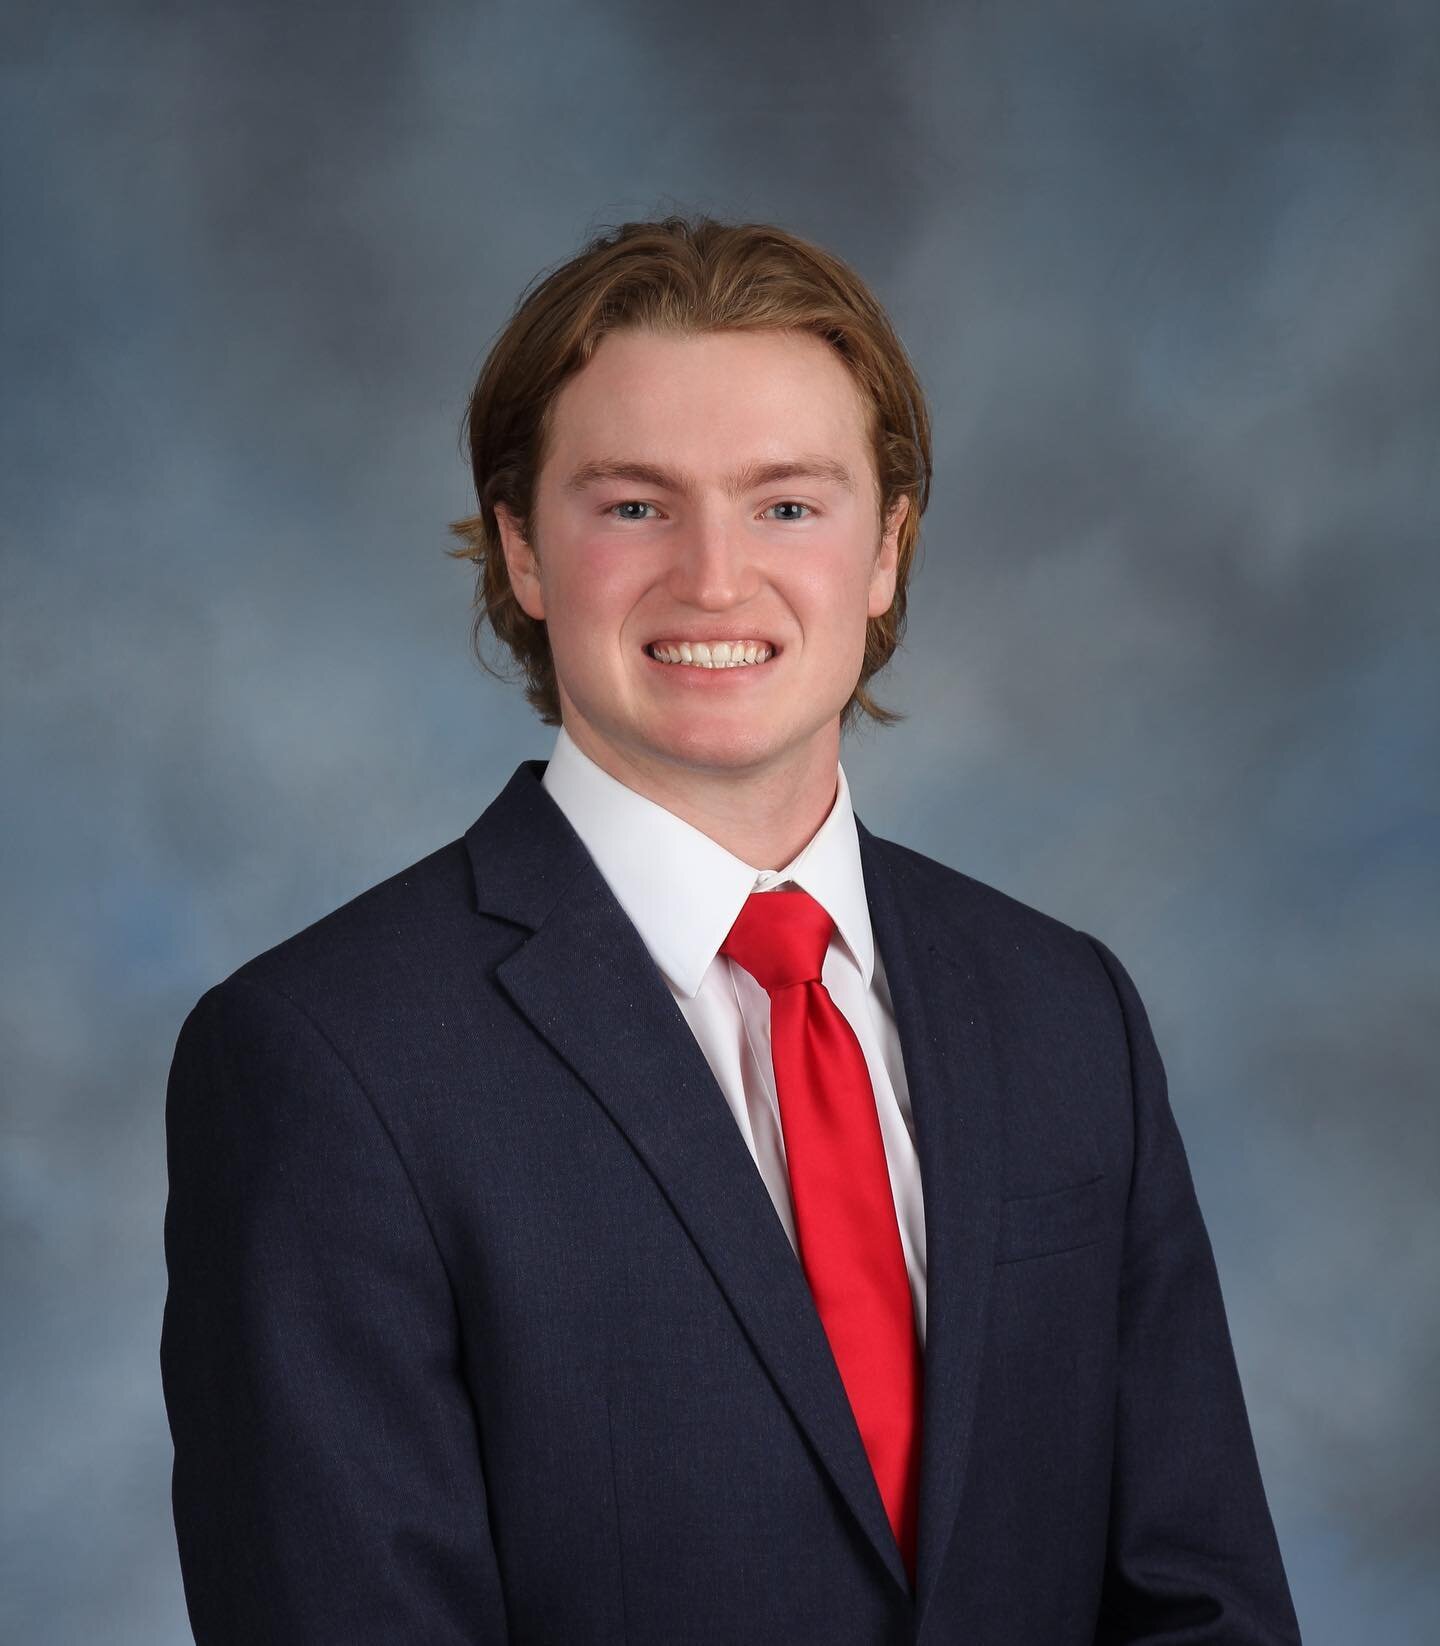 The final #spotlightsunday is our VP of Public Relations, Everett Bueter. Everett is a Junior, finance major with plans go into restaurant franchising and commercial real estate! In his free time he enjoys working out, fly fishing, hunting, reading, 